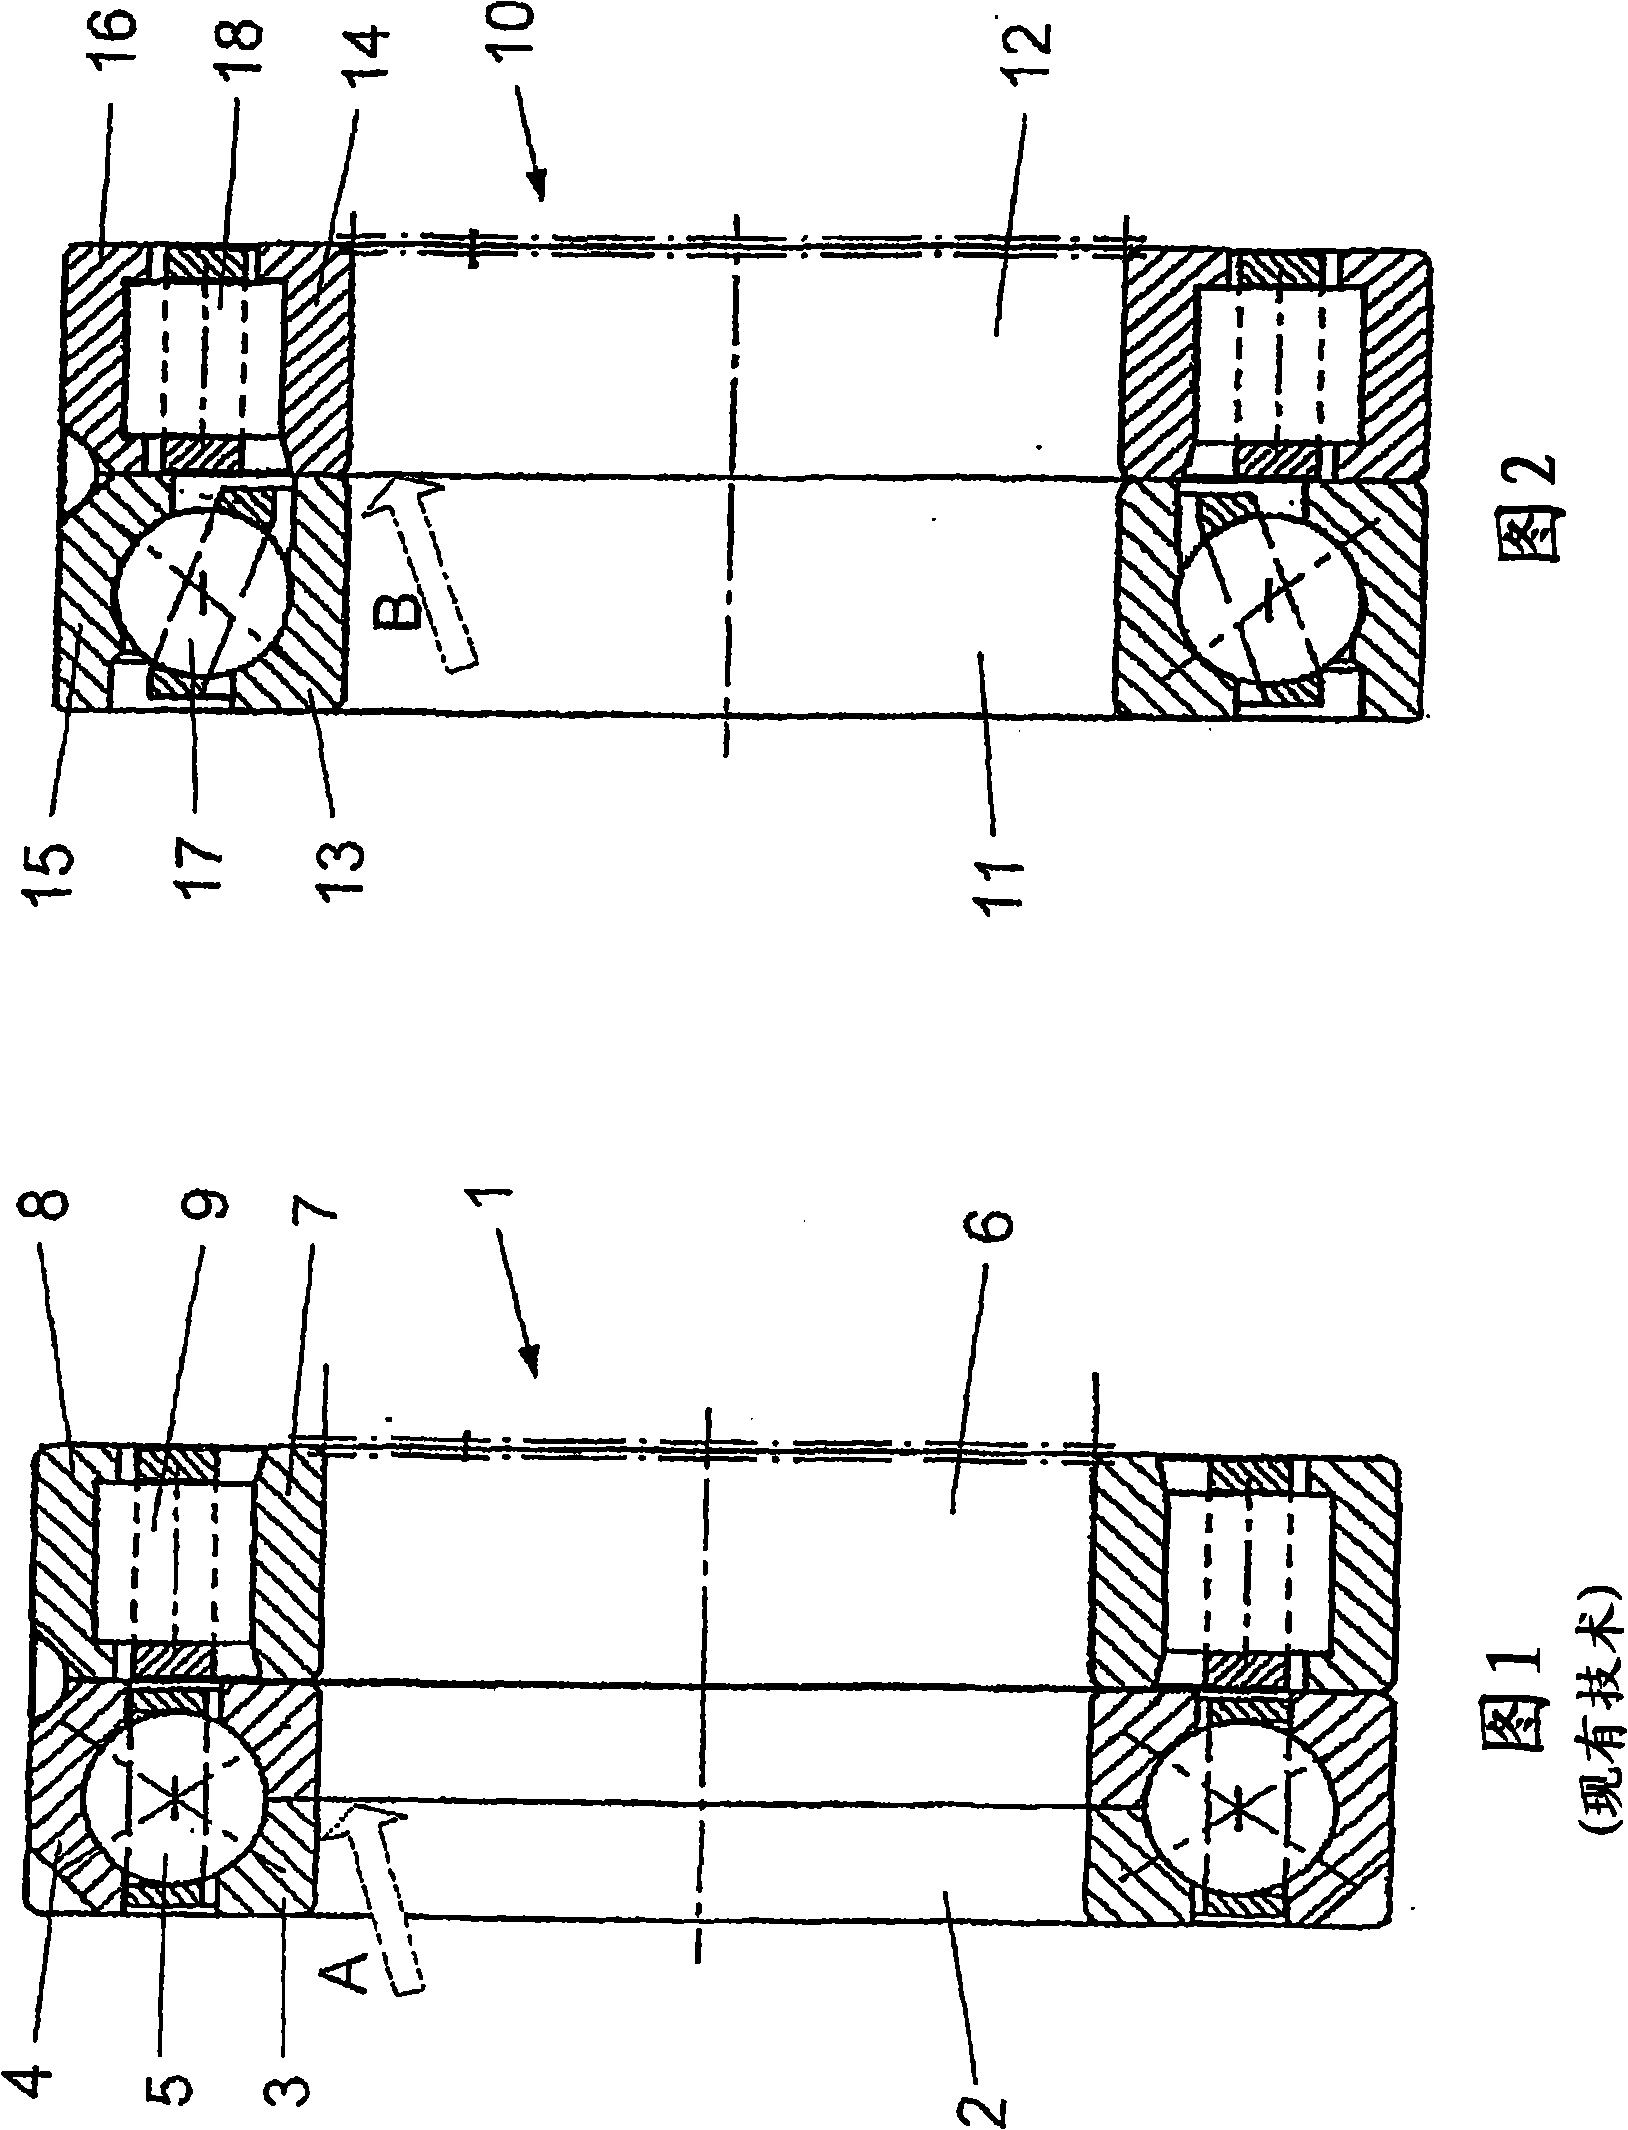 Bearing set with an angular ball bearing and cylinder roller bearing receiving axial forces